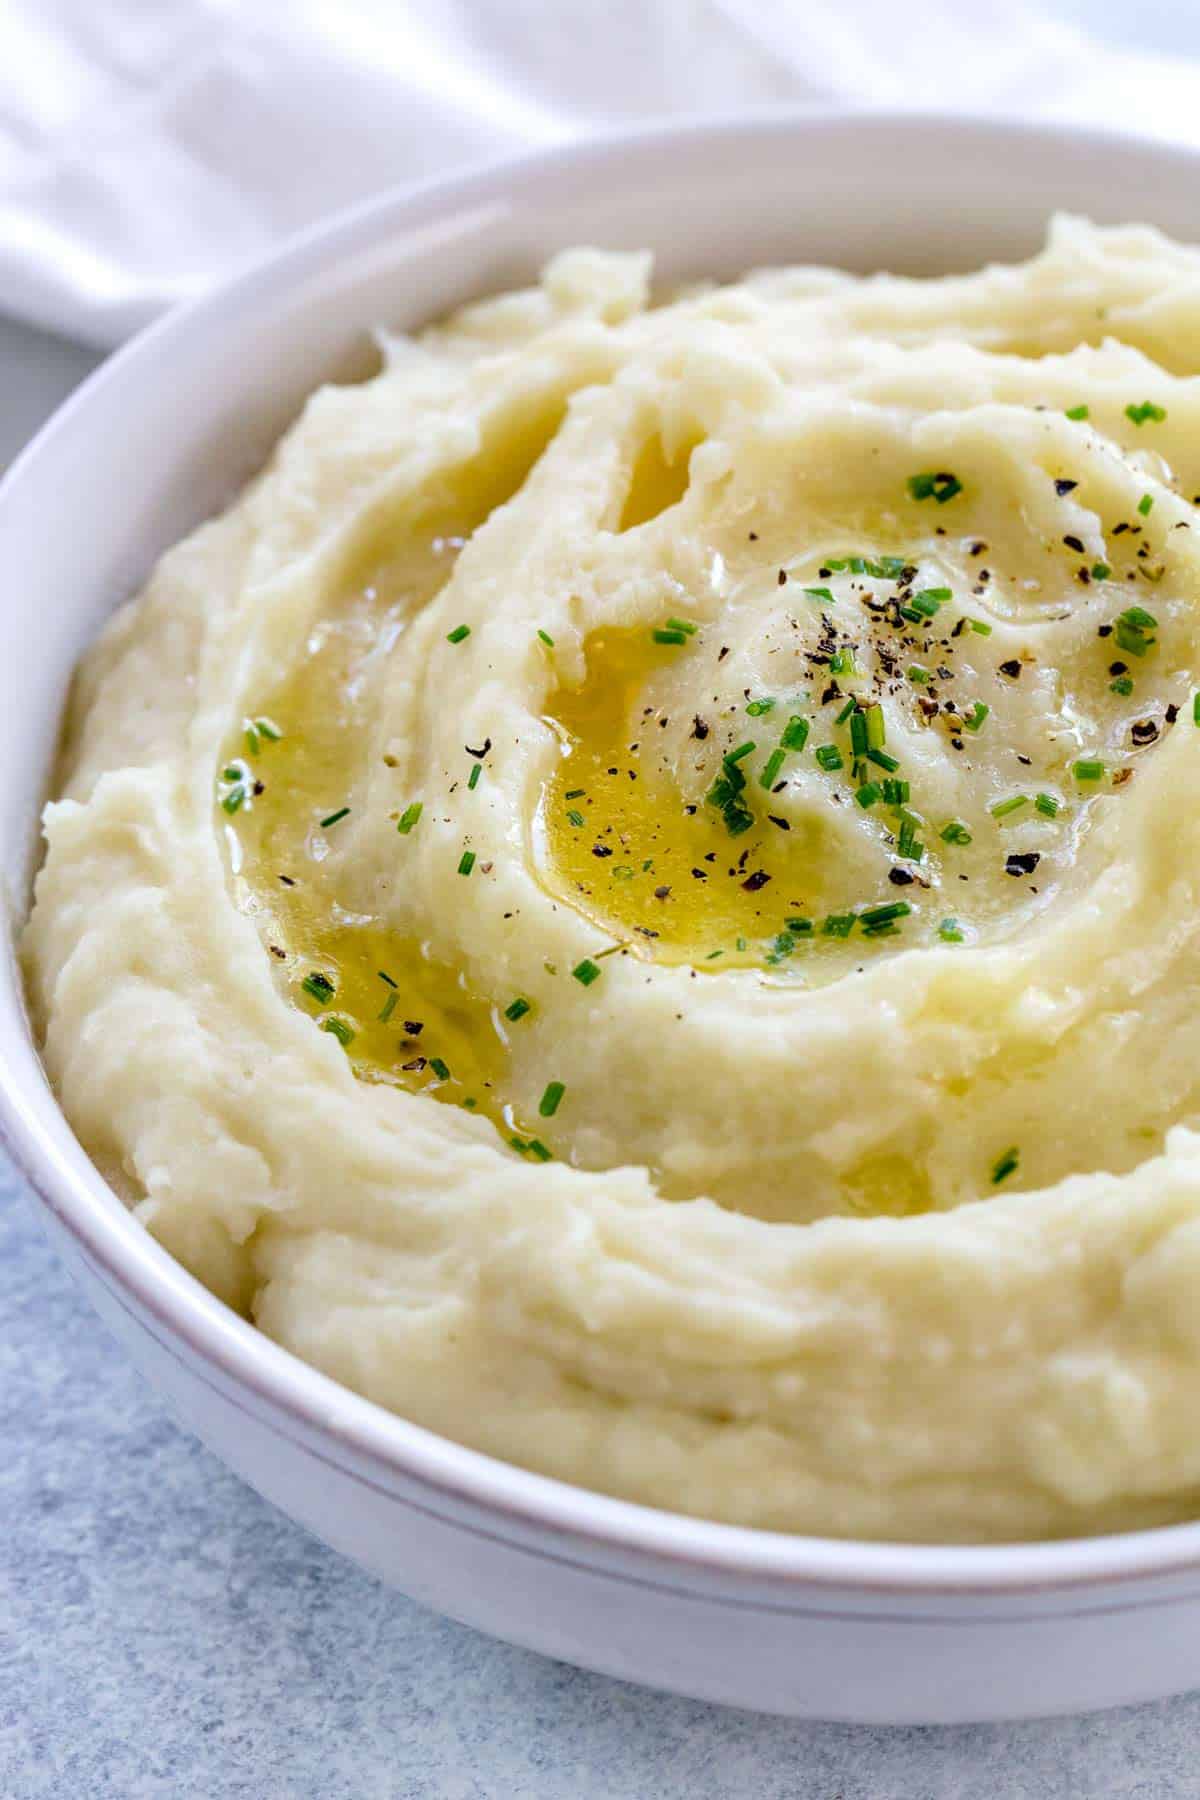 How To Make Mashed Potatoes In An Instant Pot - InstantPotClub.com.